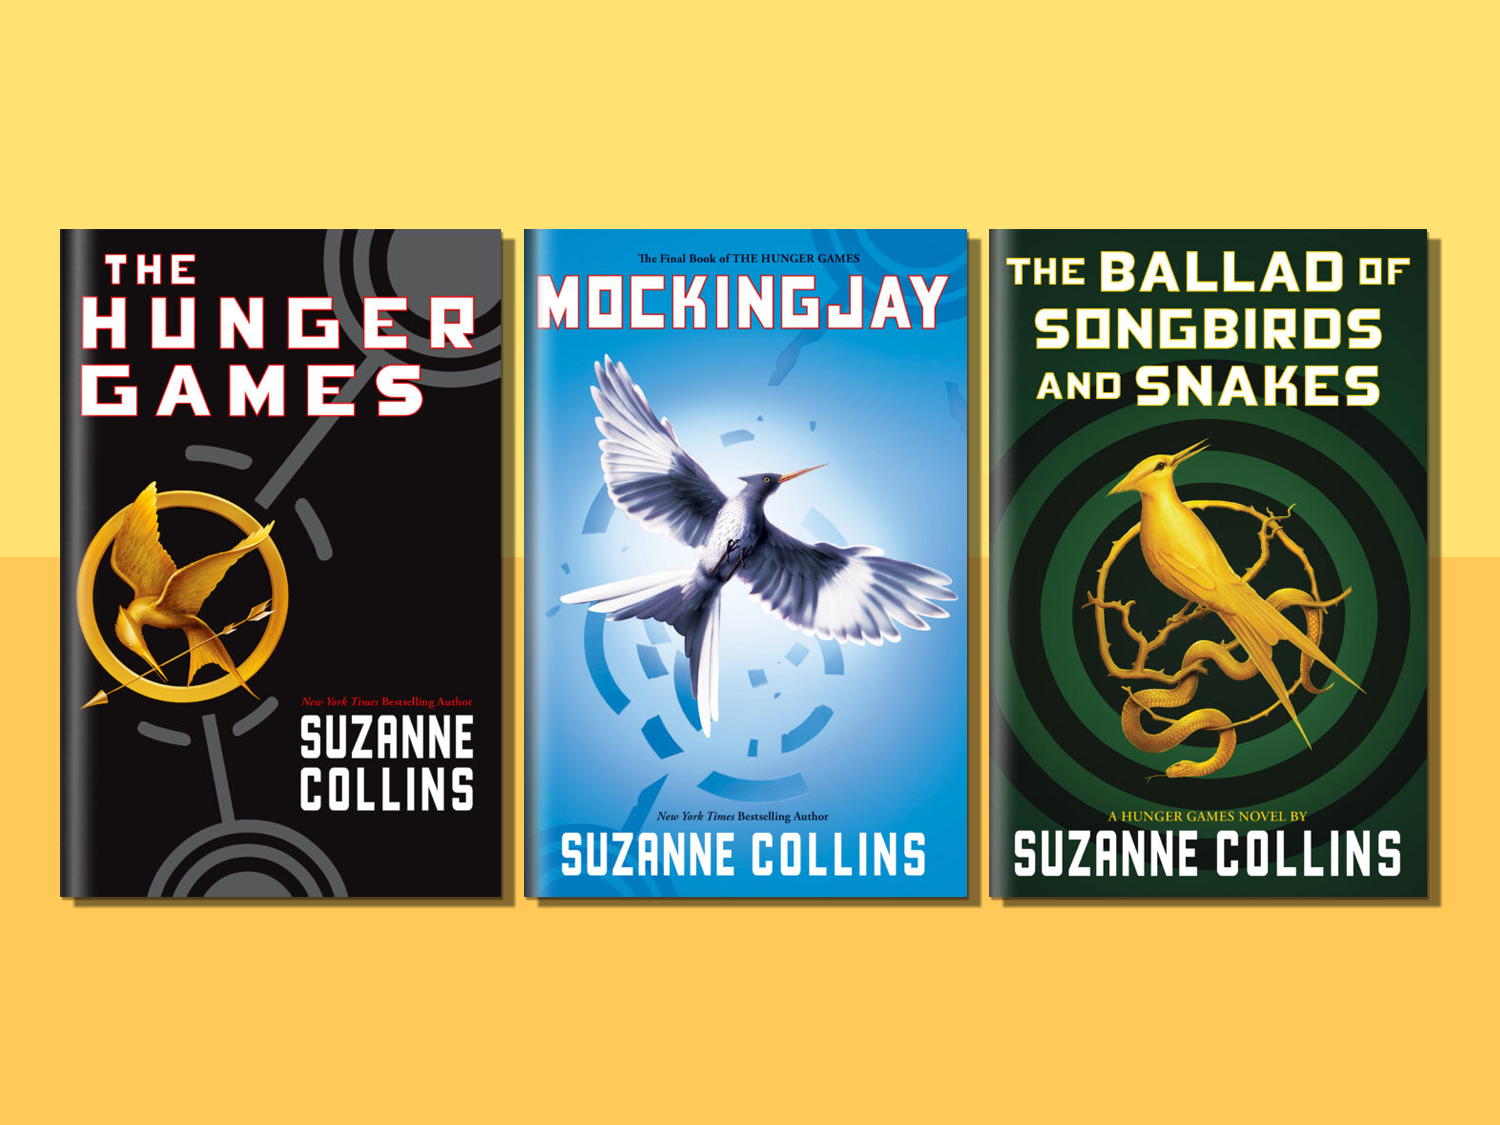 The Hunger Games 4-Book Paperback Box Set (The Hunger Games